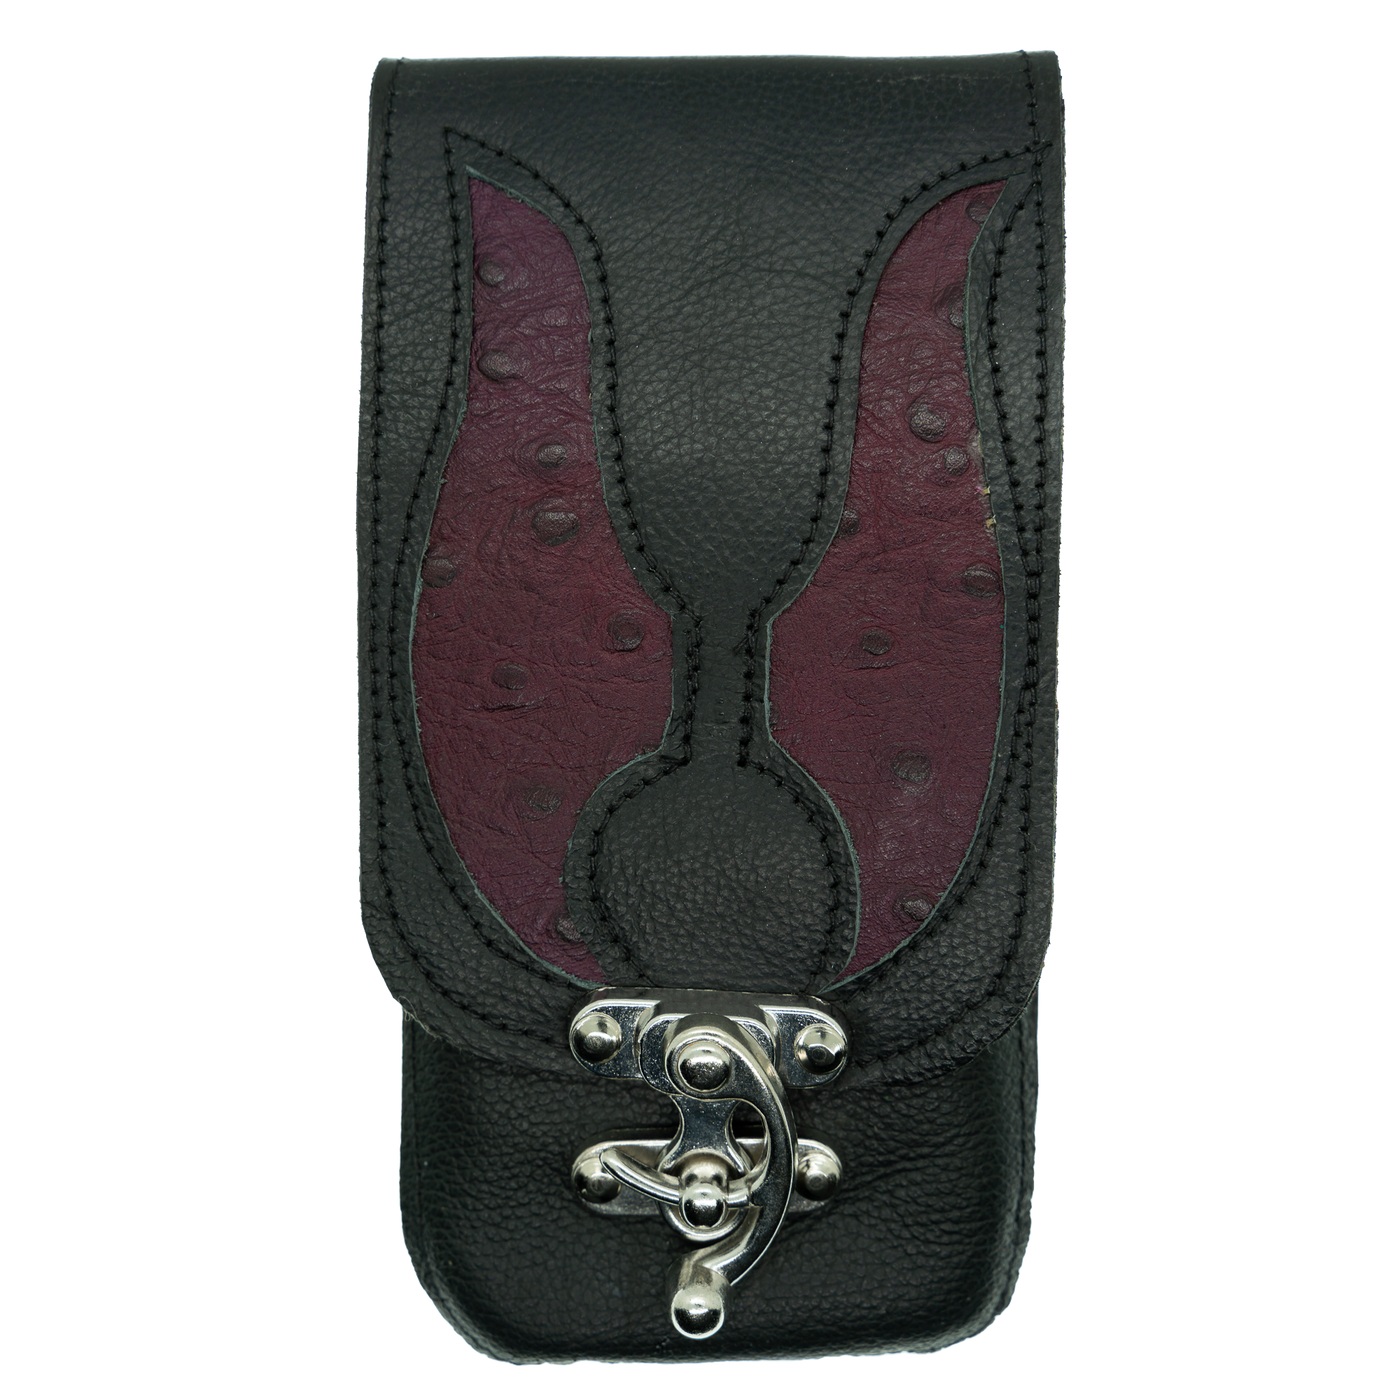 Leather & Ostrich Skin Mobile Phone Pouch